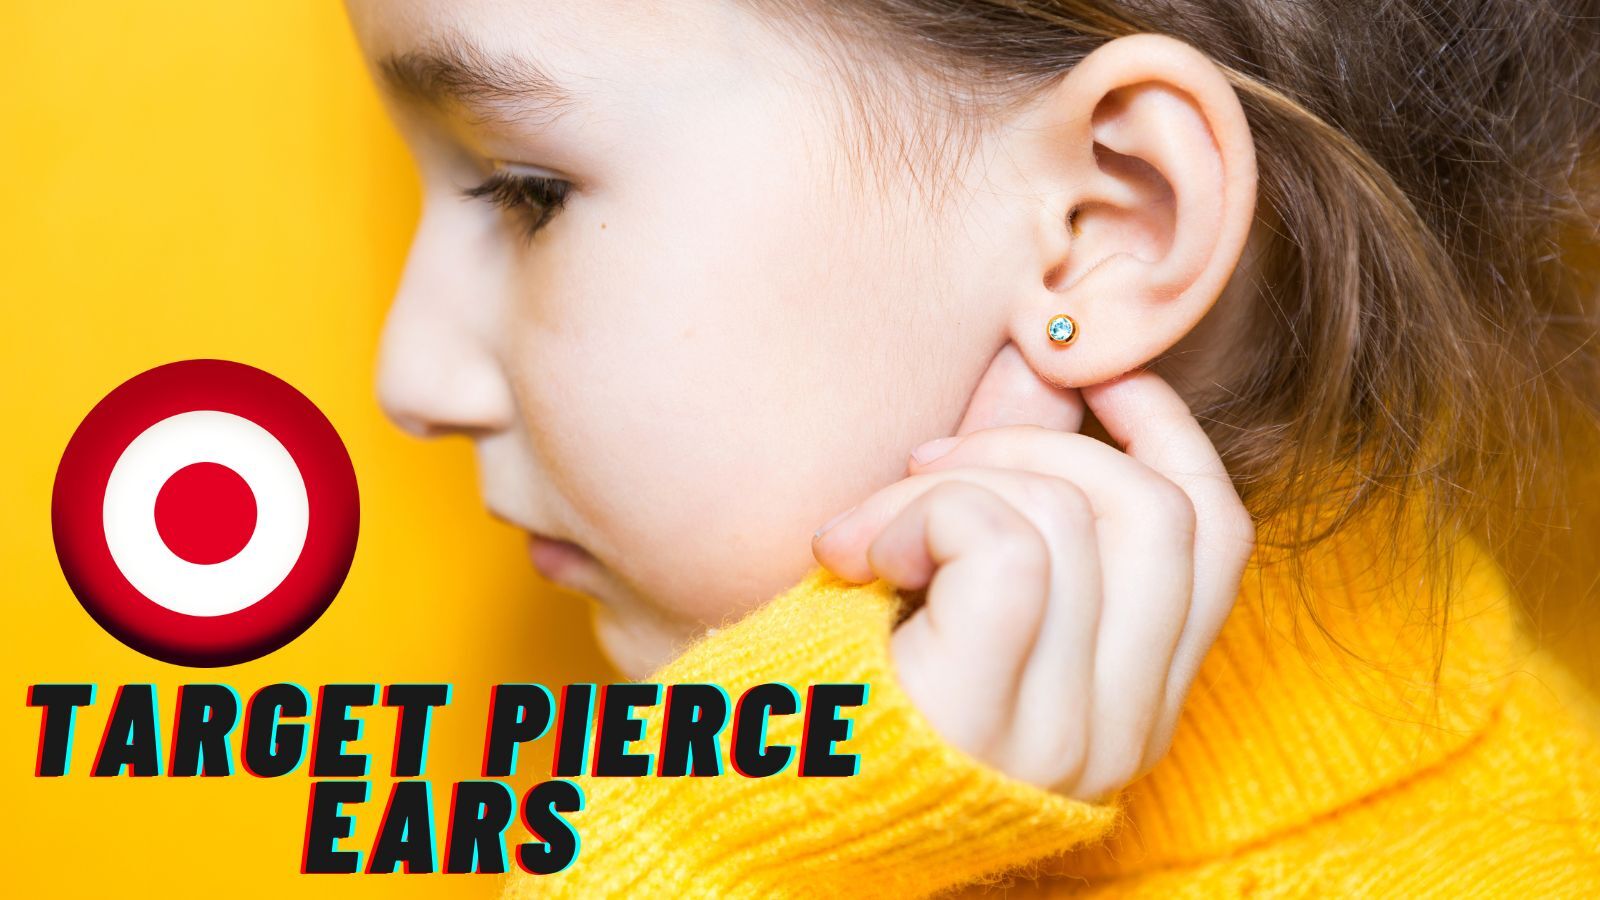 Does Target Pierce Ears? (Everything You're Interested in Is Here!)